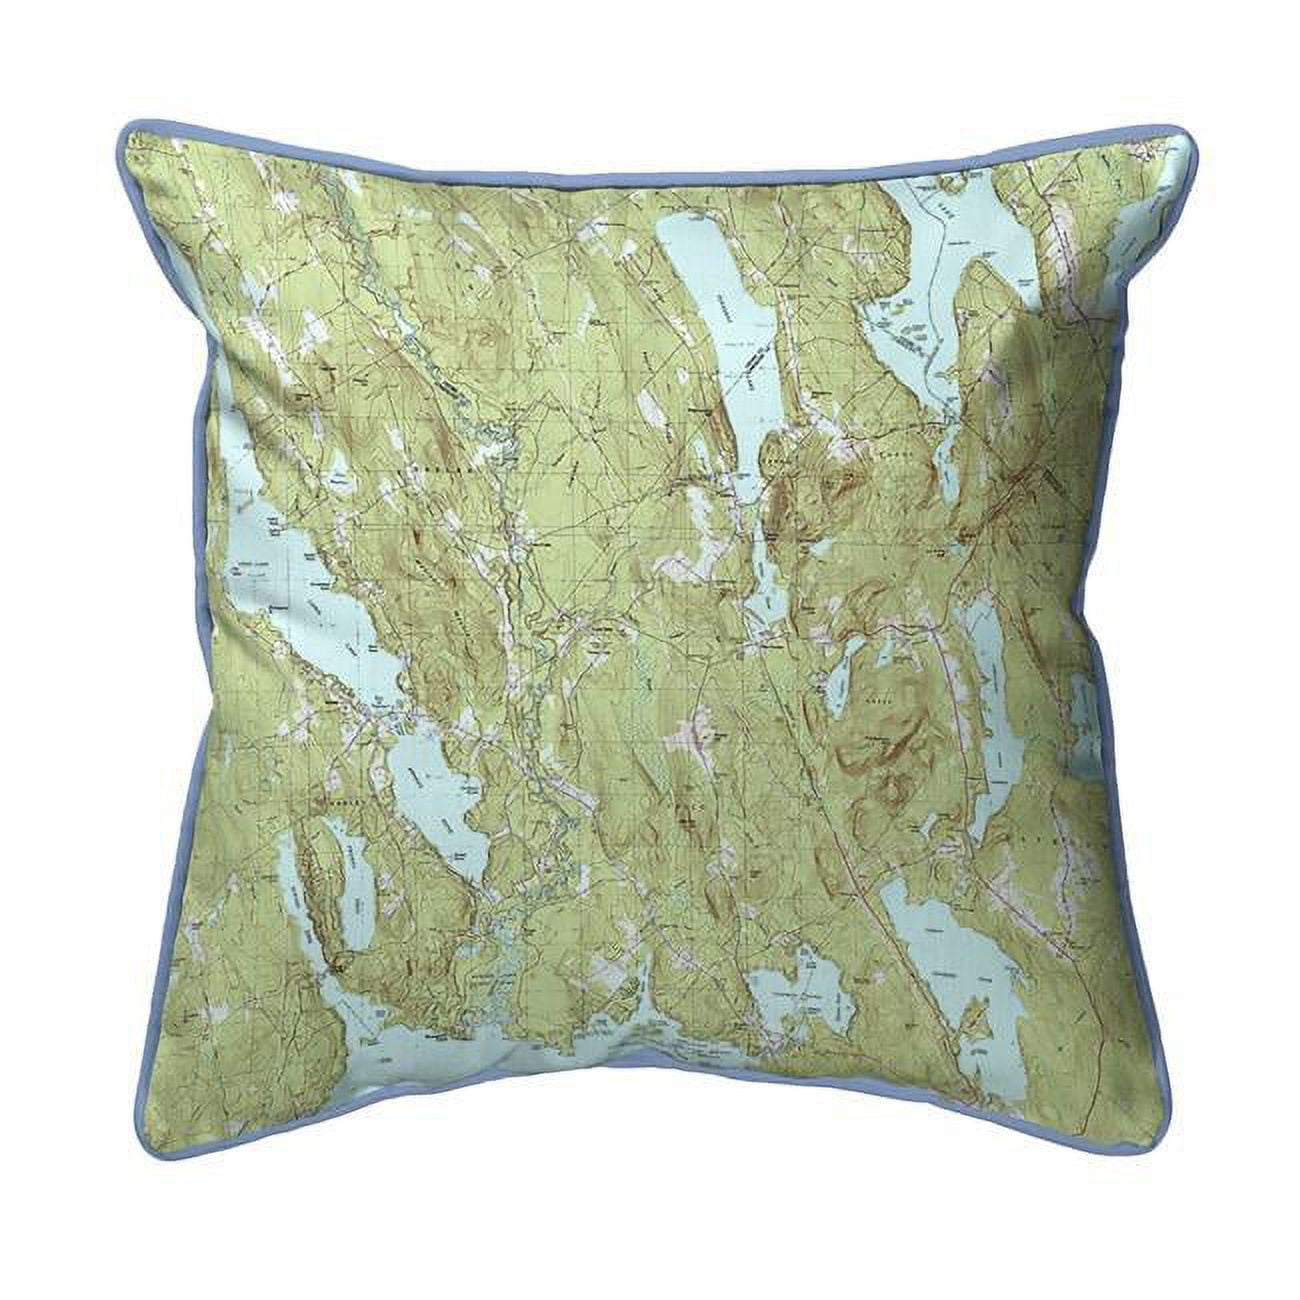 HJ434 Casco & Sebago Lake, ME Nautical Map Large Corded Indoor & Outdoor Pillow - 18 x 18 in -  Betsy Drake